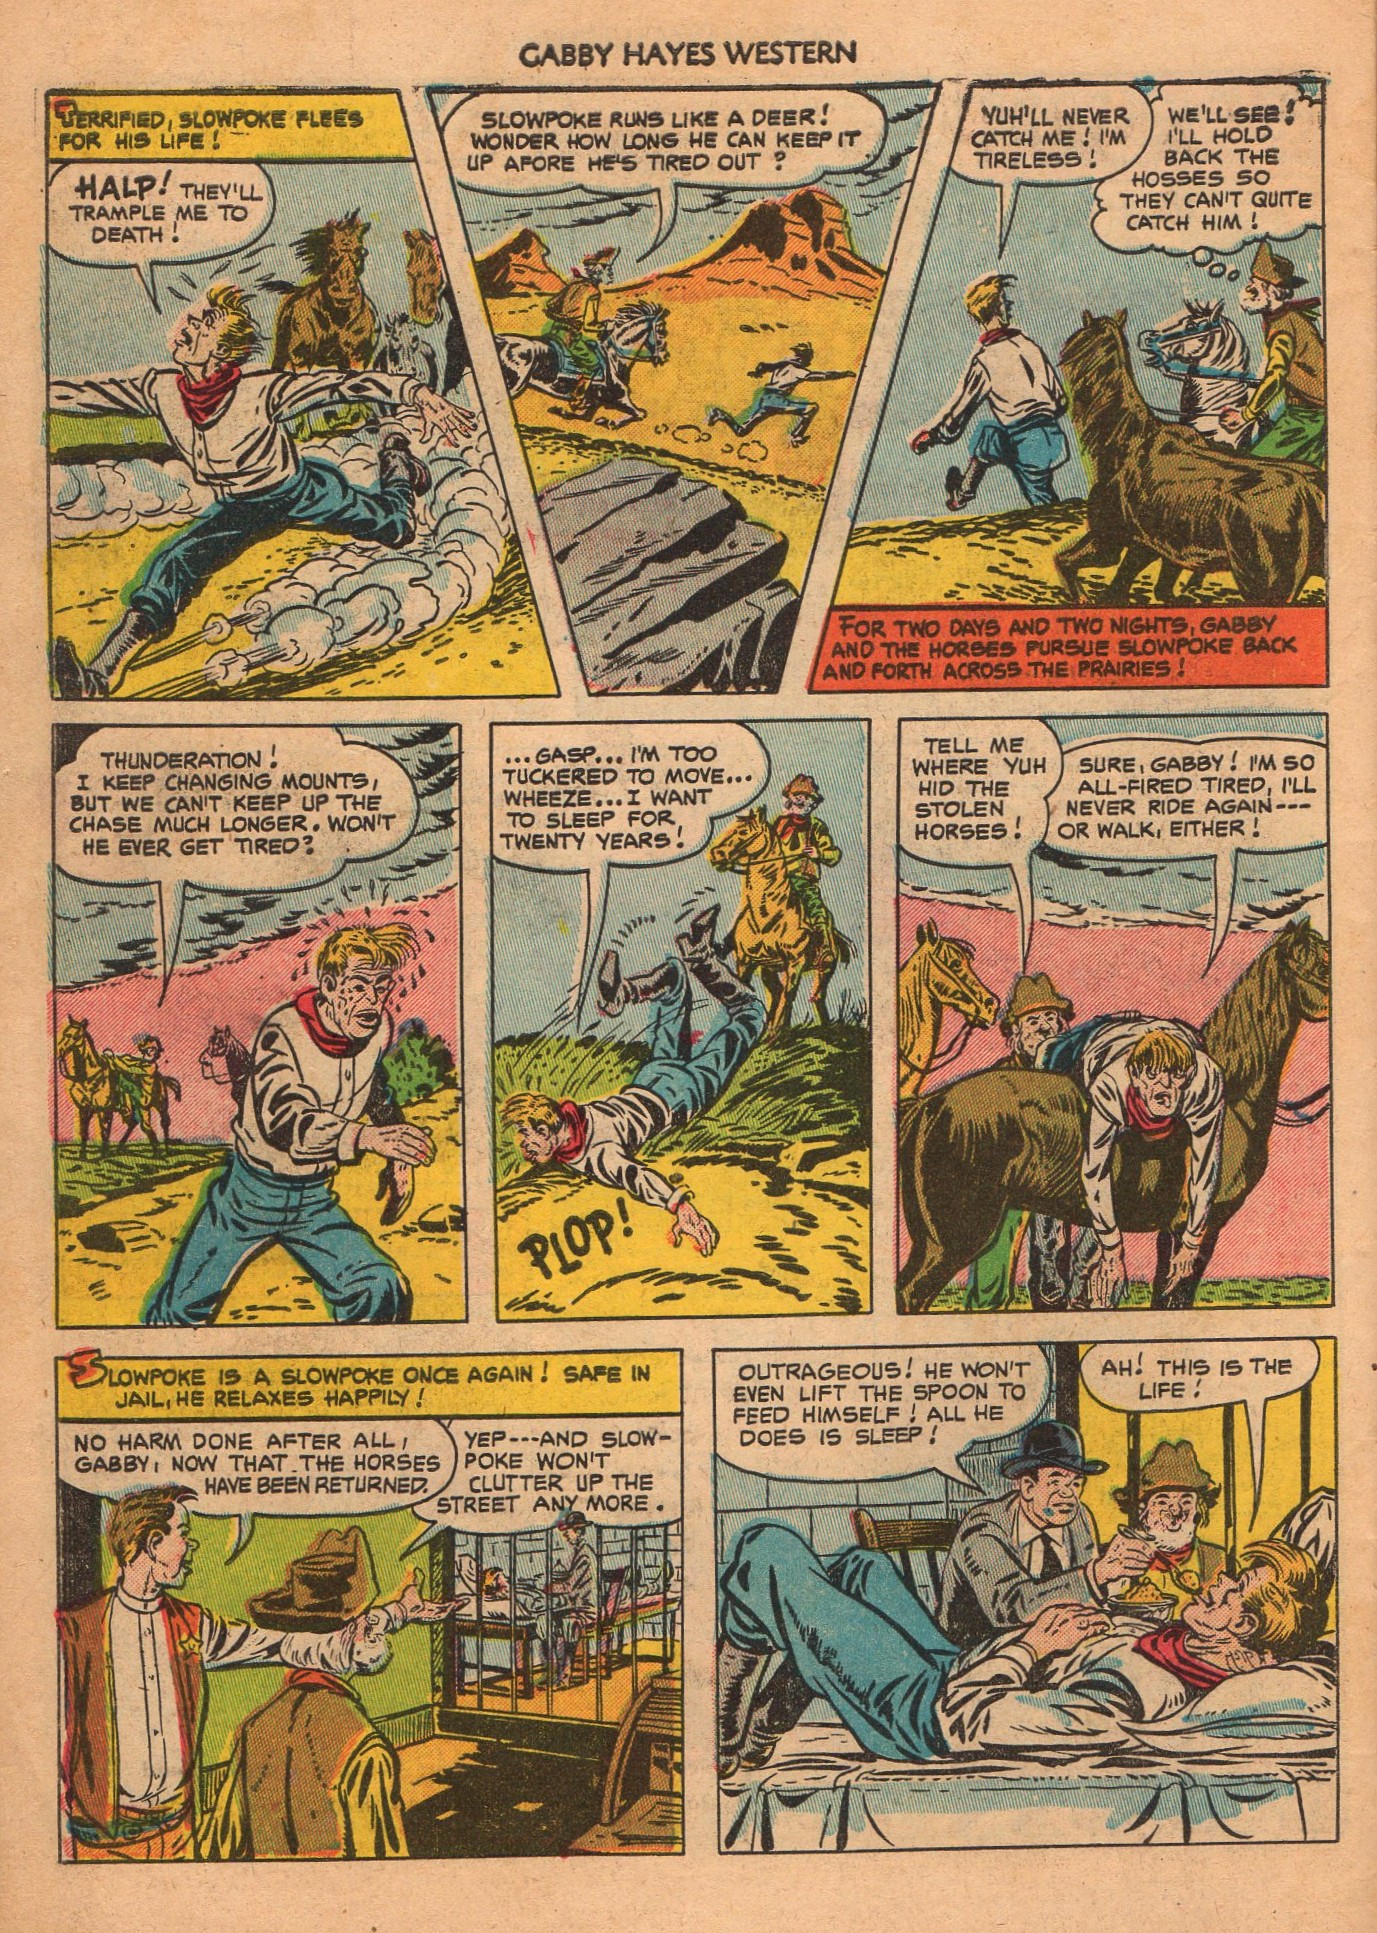 Read online Gabby Hayes Western comic -  Issue #48 - 34